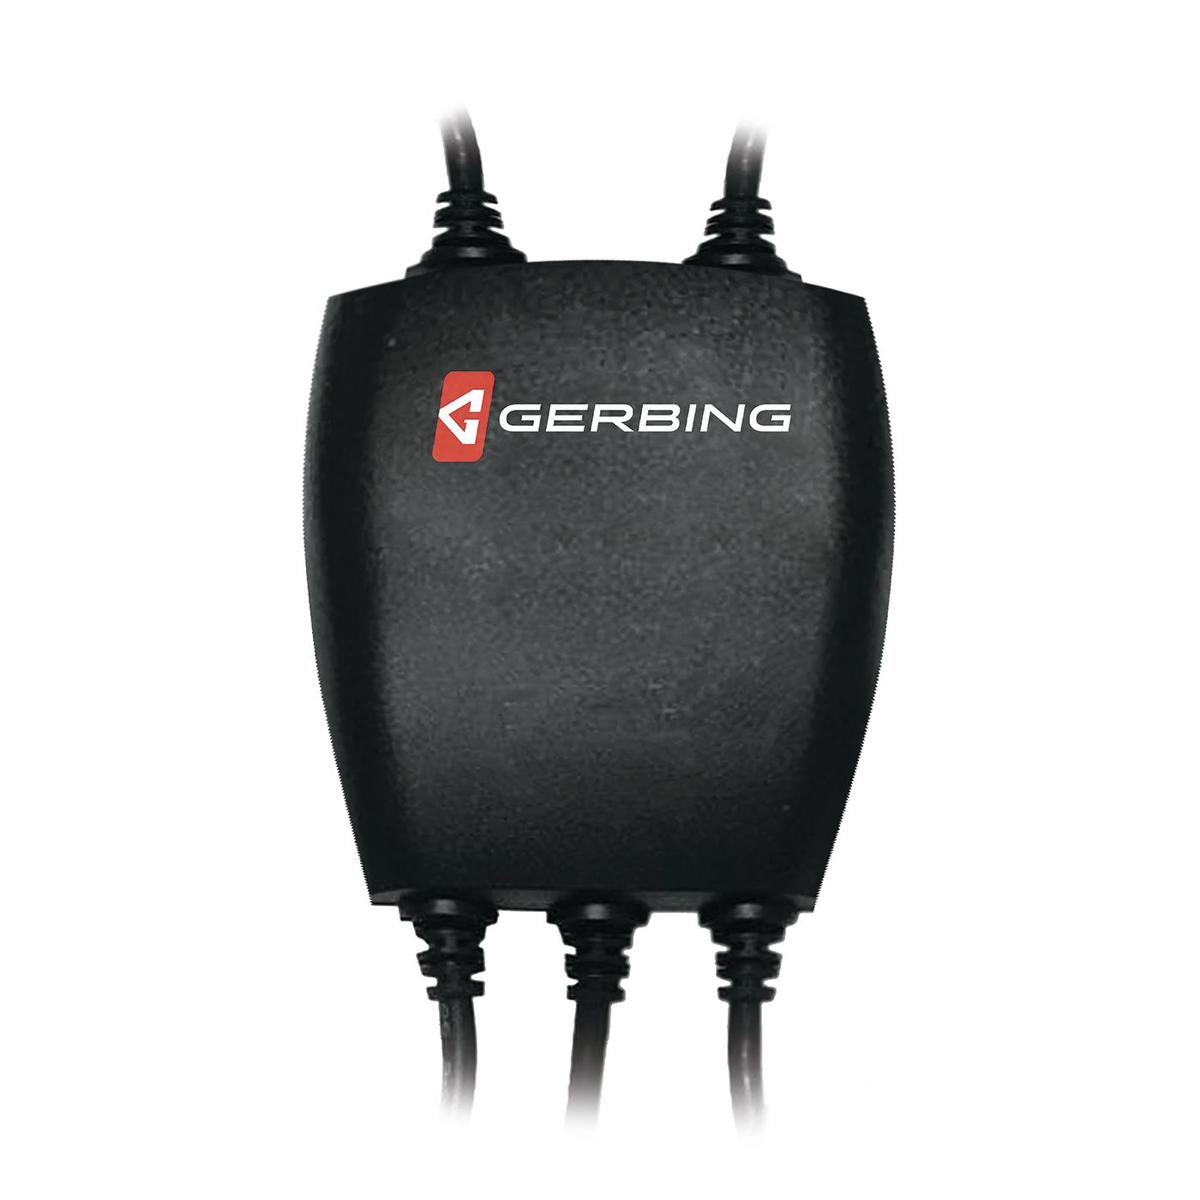 Gerbing 12V Dual-Zone Permanent Temperature Controller, Size: One Size